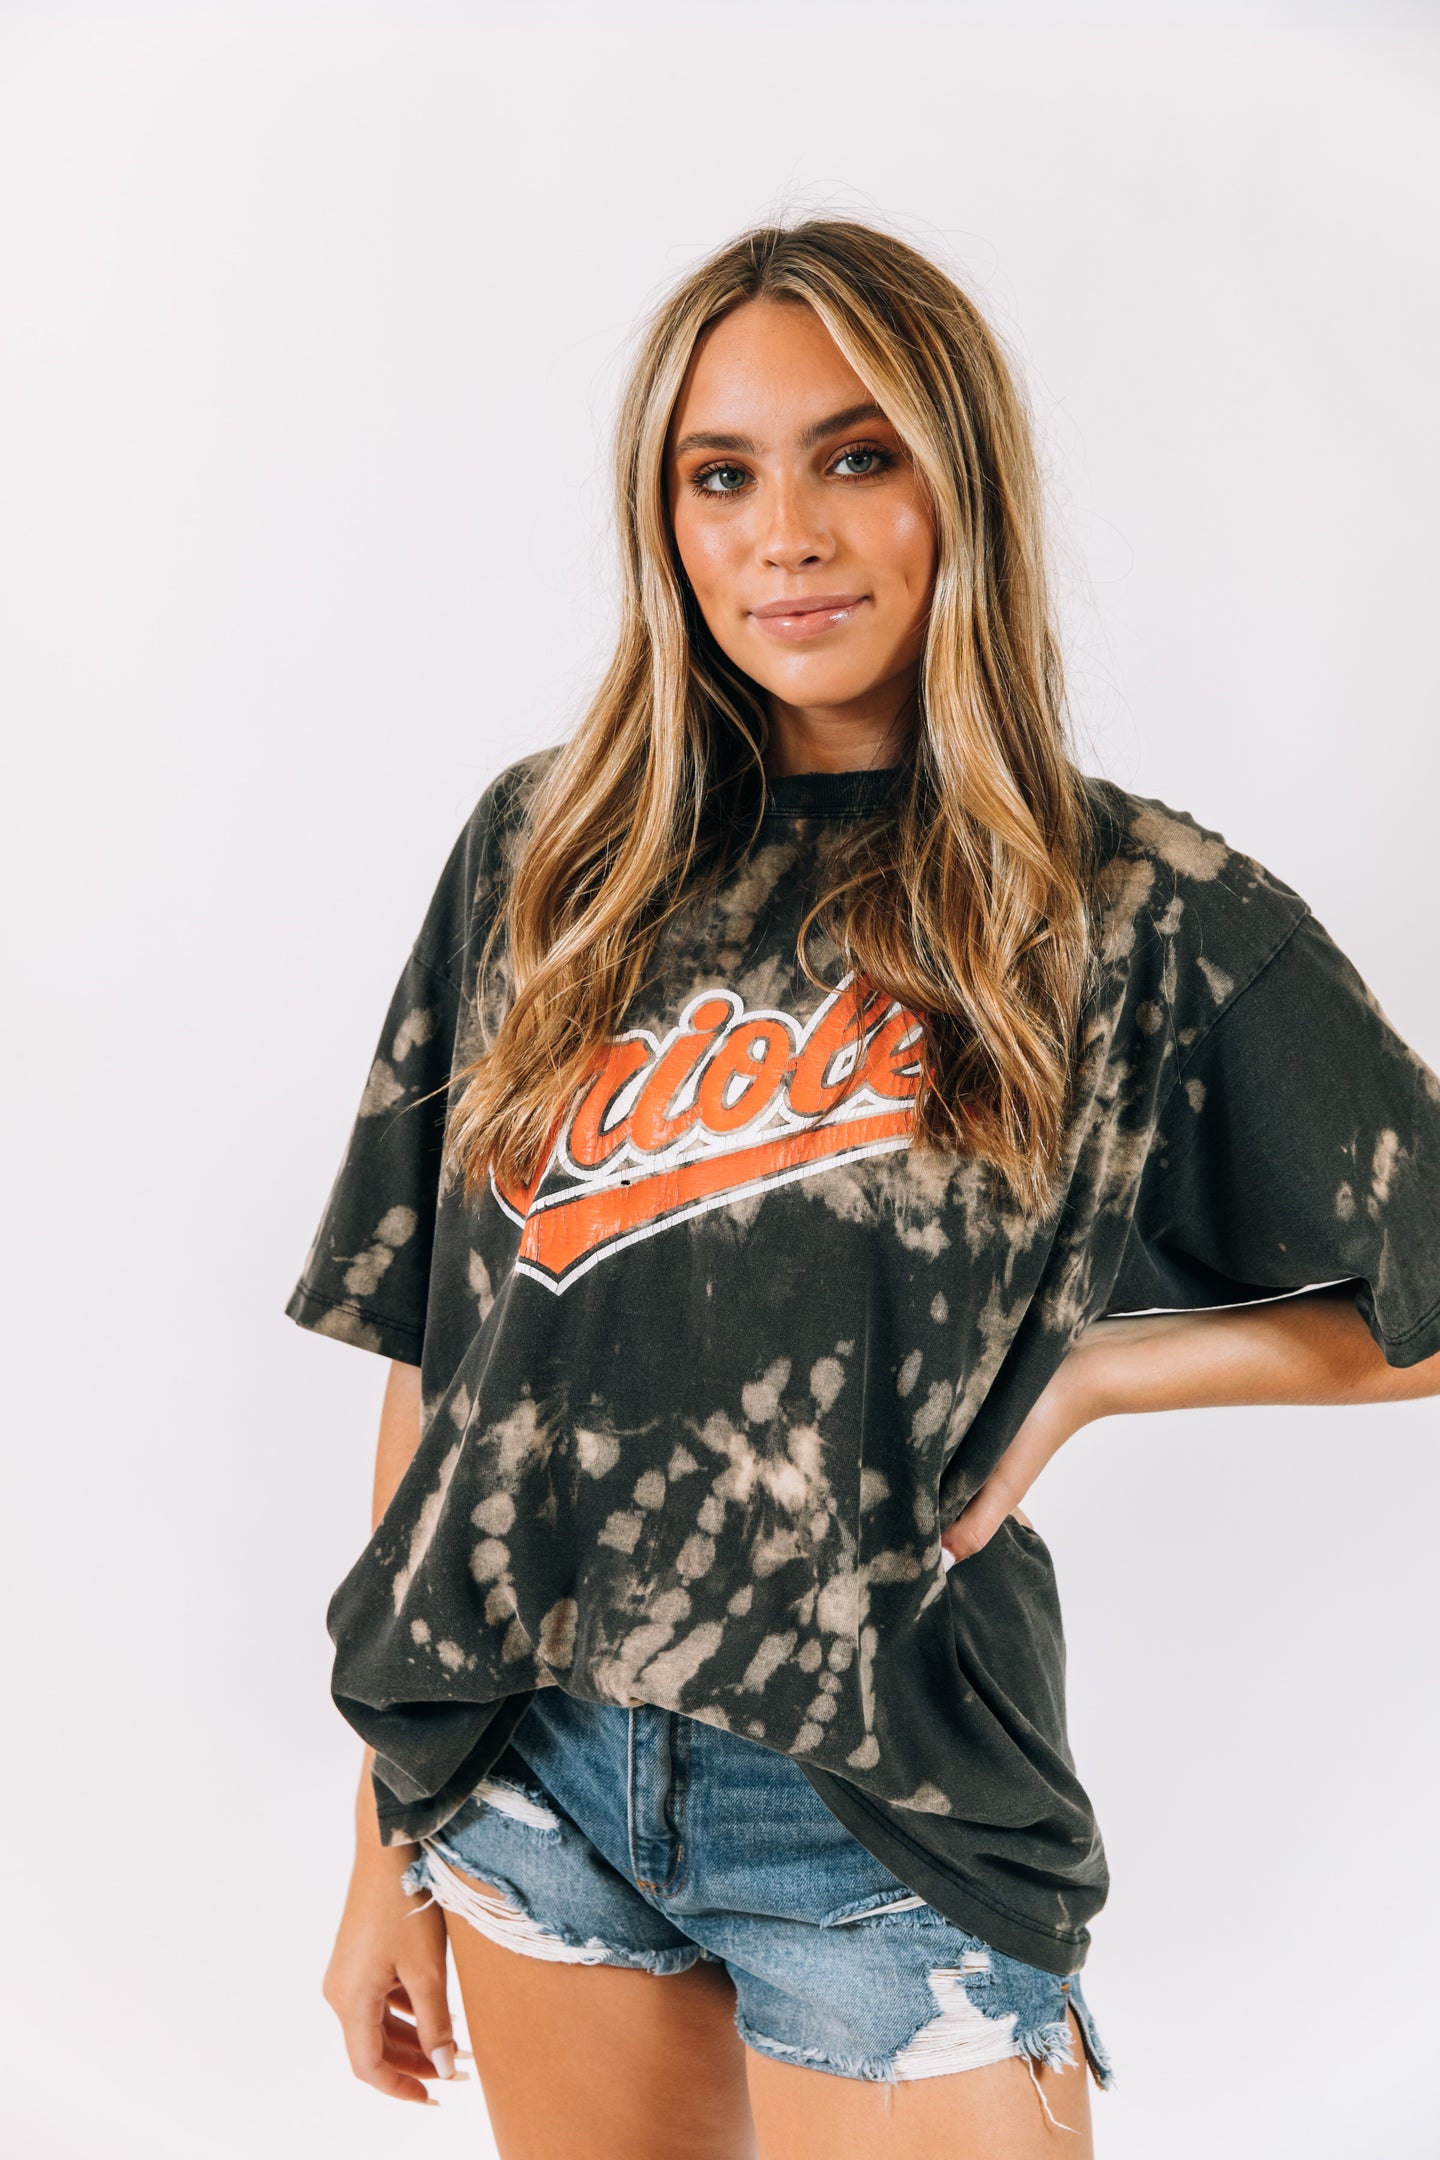 Orioles Bleached Tee